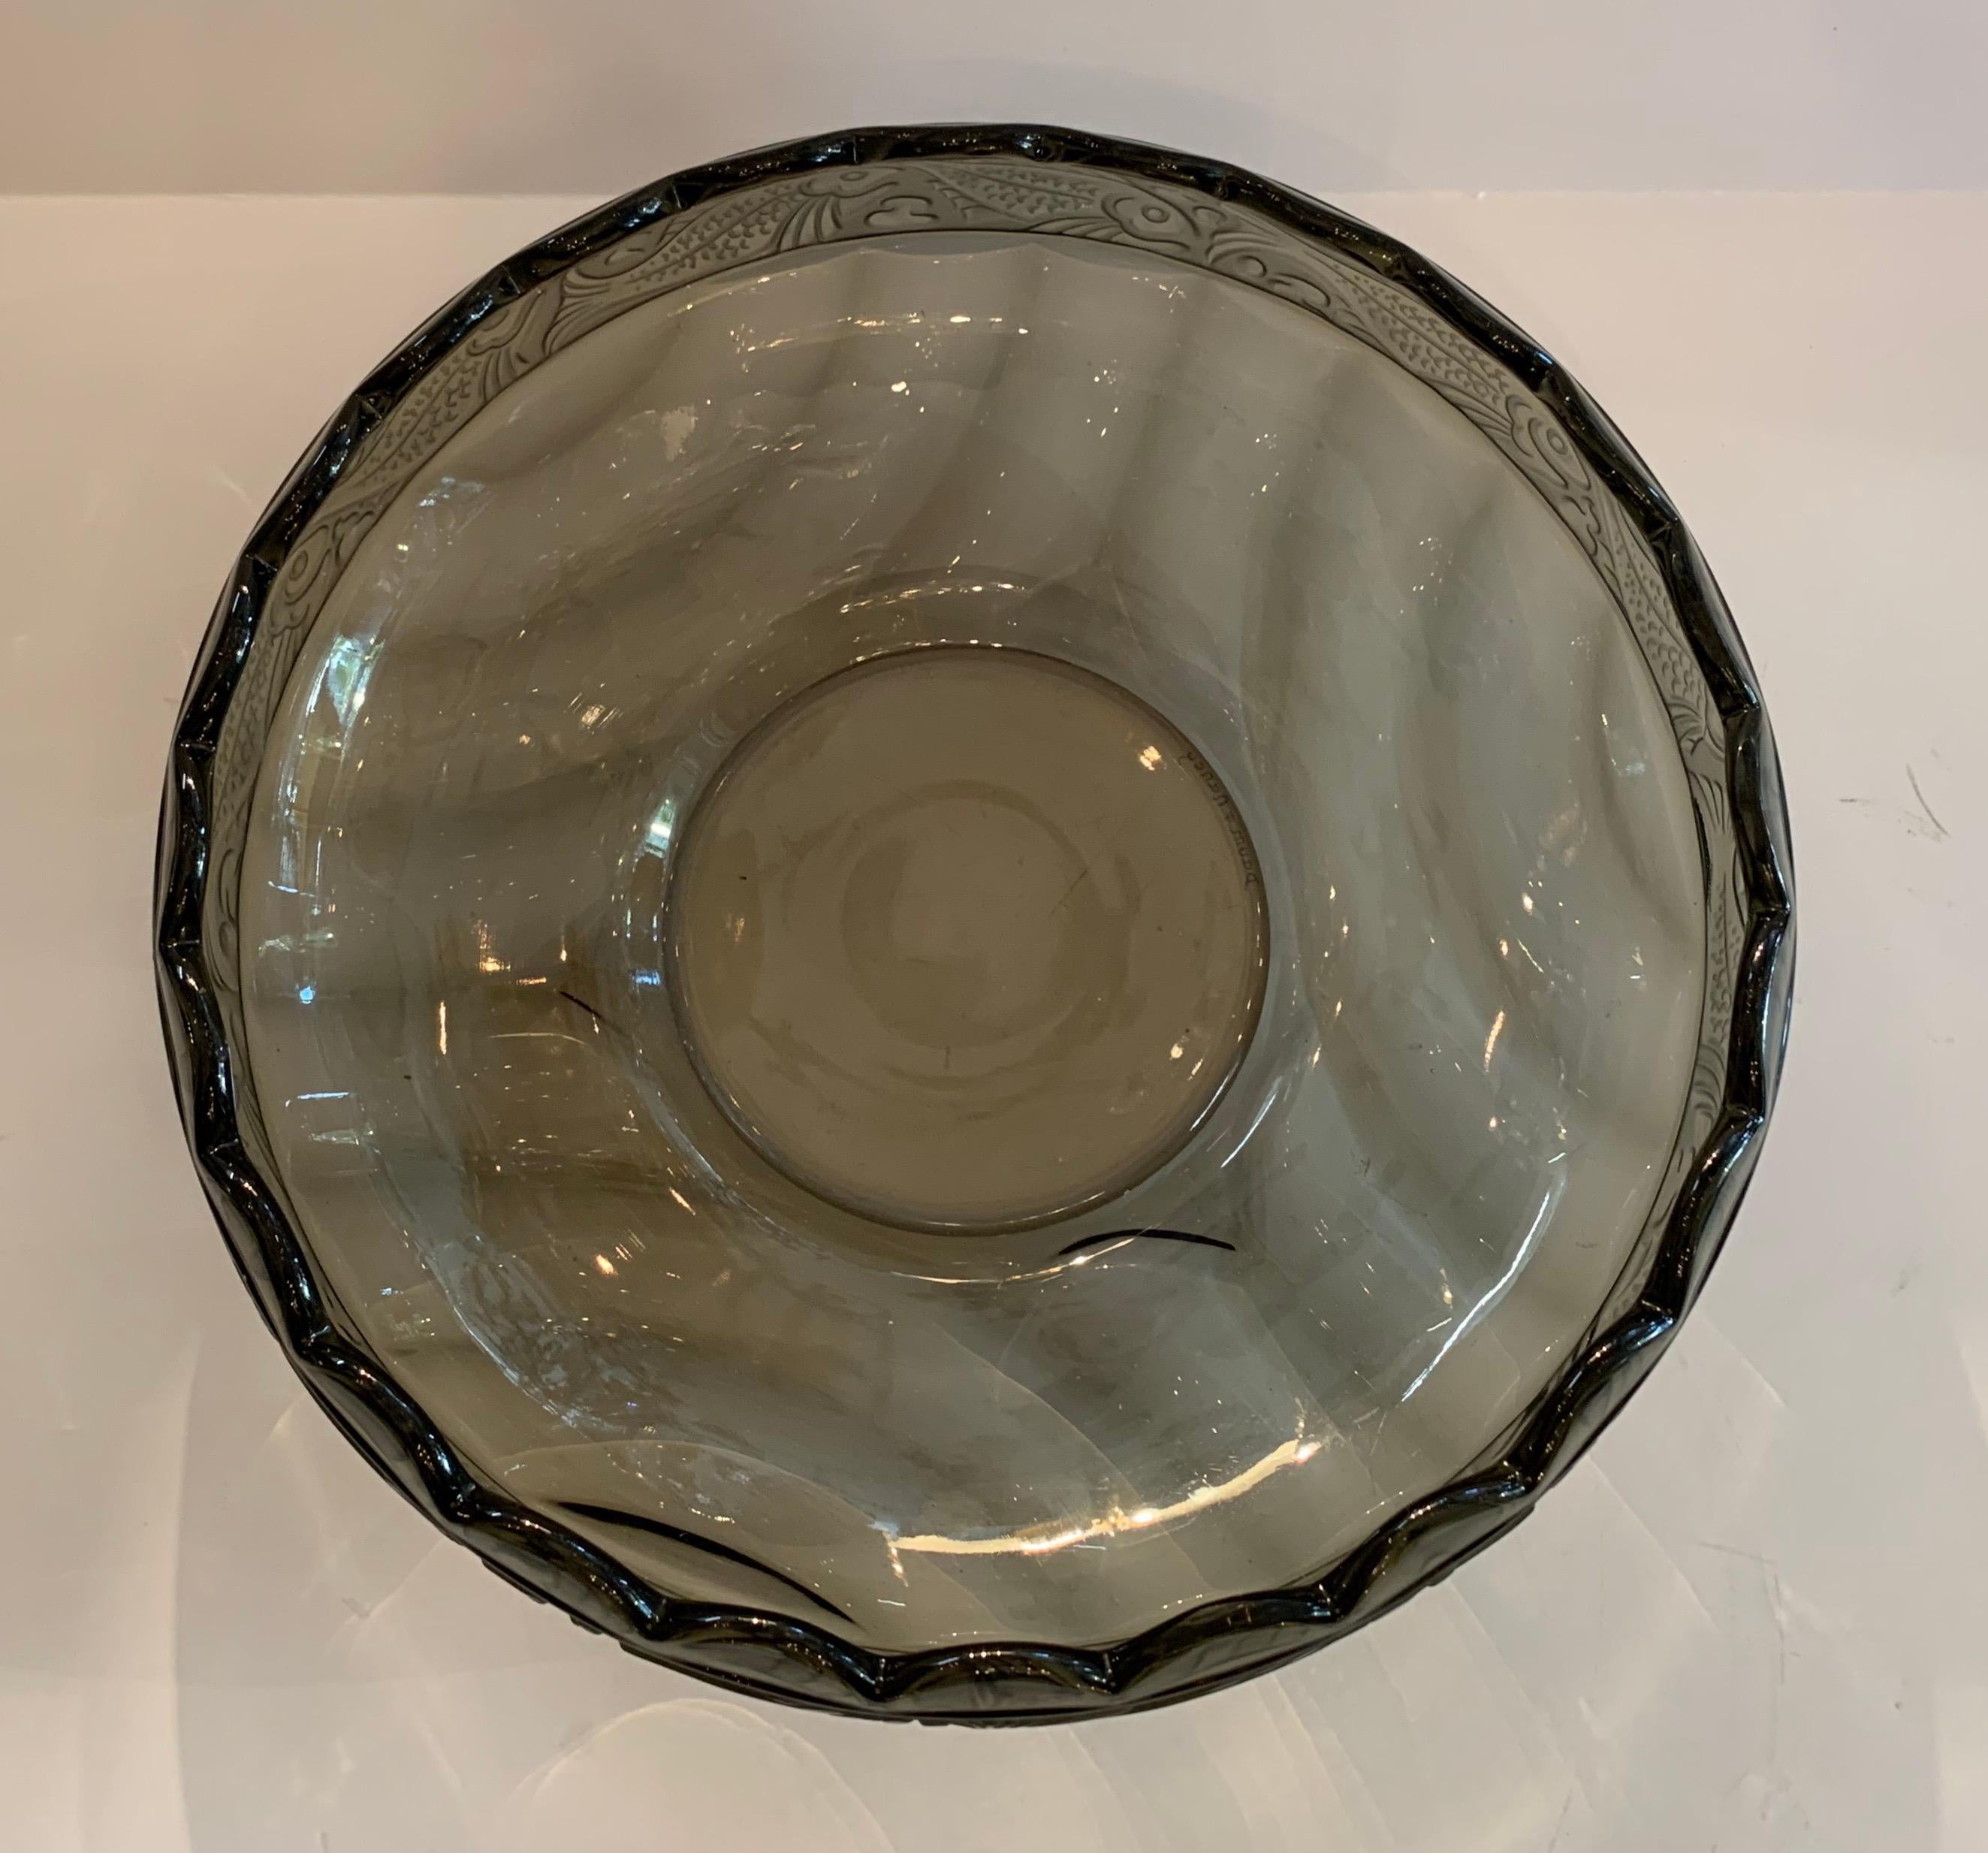 Rare Mid-Century Modern Daum Nancy France Art Deco Smoke Grey Glass Centerpiece In Good Condition For Sale In Roslyn, NY